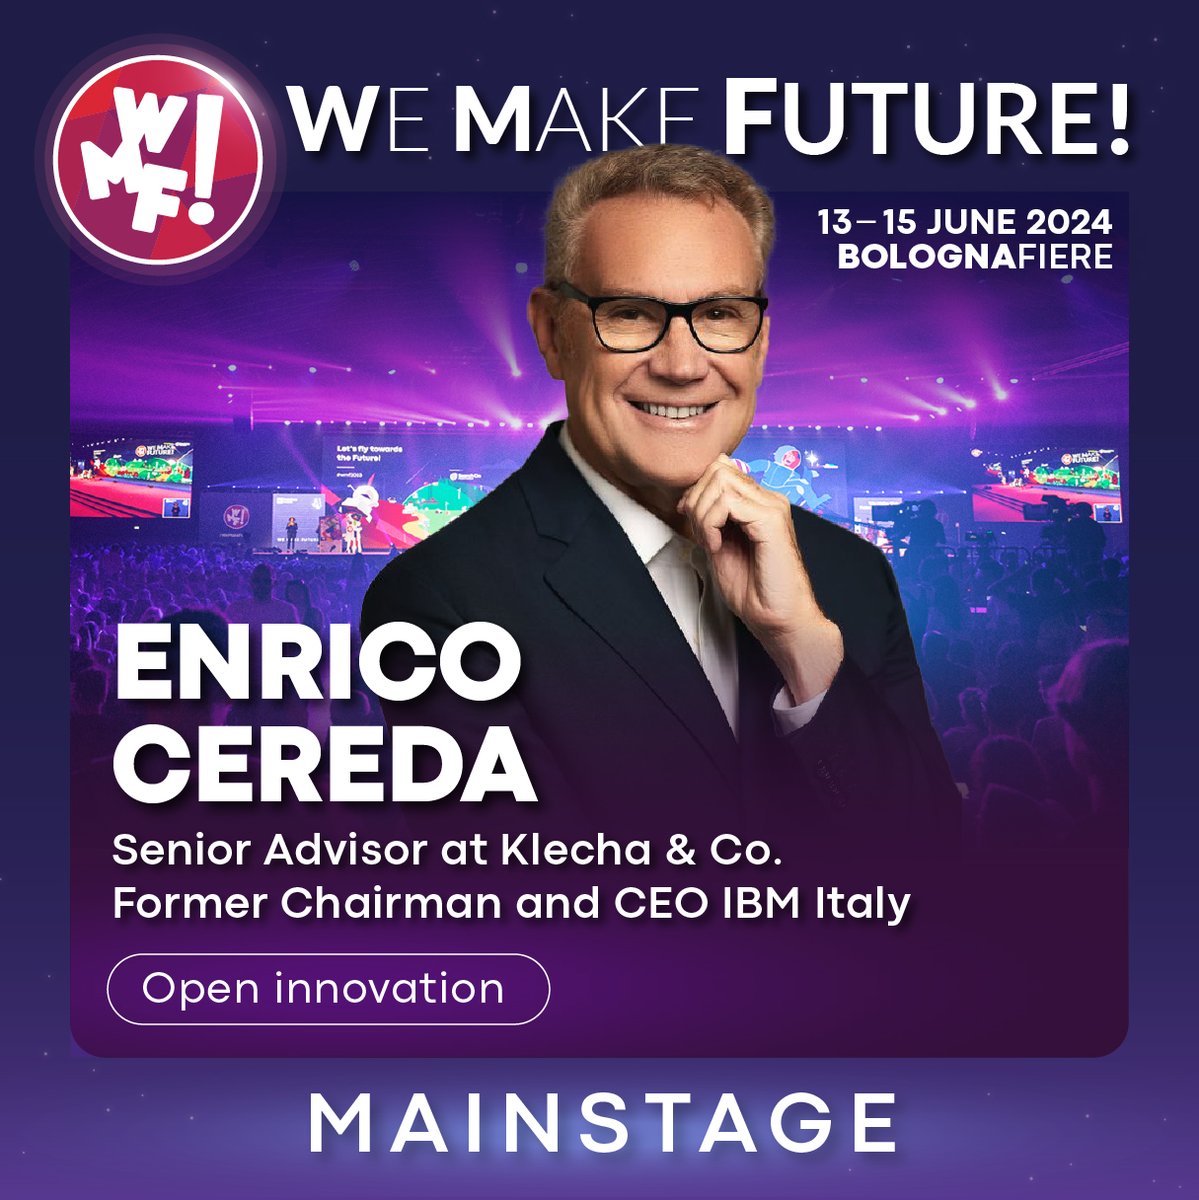 ⚡ Enrico Cereda, Former Chairman & CEO IBM Italy - Senior Advisor at Klecha & Co, will be a guest on the Mainstage of #WMF2024 talking about Catalyzing Innovation to build Strategies and Visions for the Future. Meet the Change Makers of Open Innovation. en.wemakefuture.it/s/65eae1cf1068…